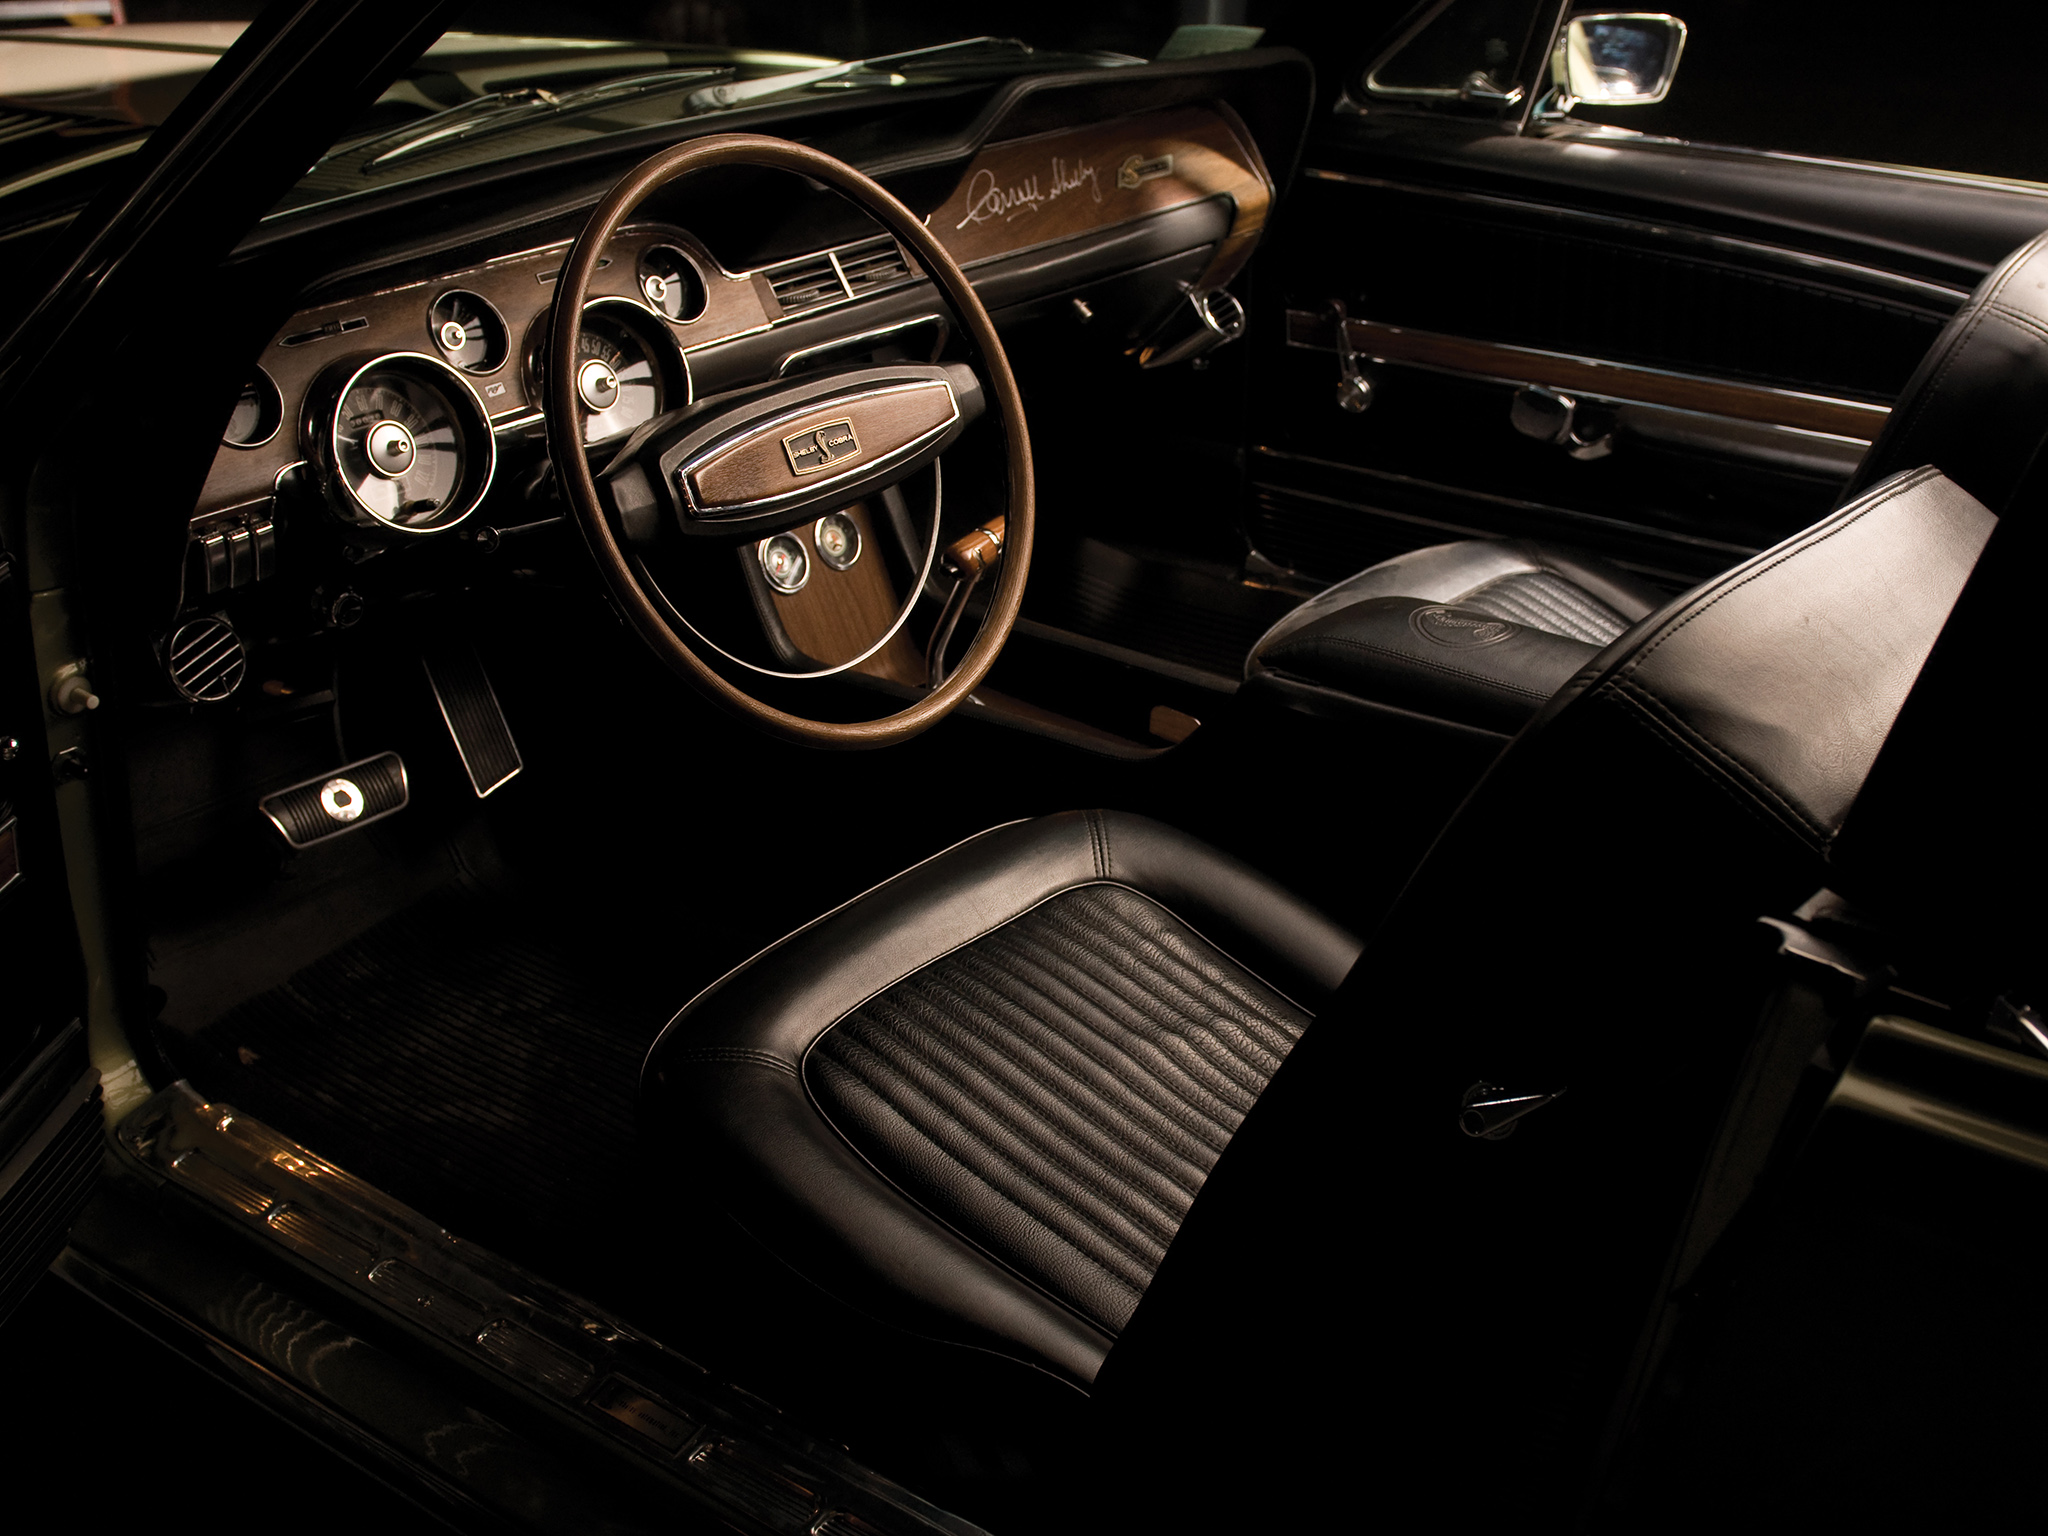 1968, Shelby, Gt500 kr, Gt500, Convertible, Ford, Mustang, Muscle, Classic, Interior Wallpaper